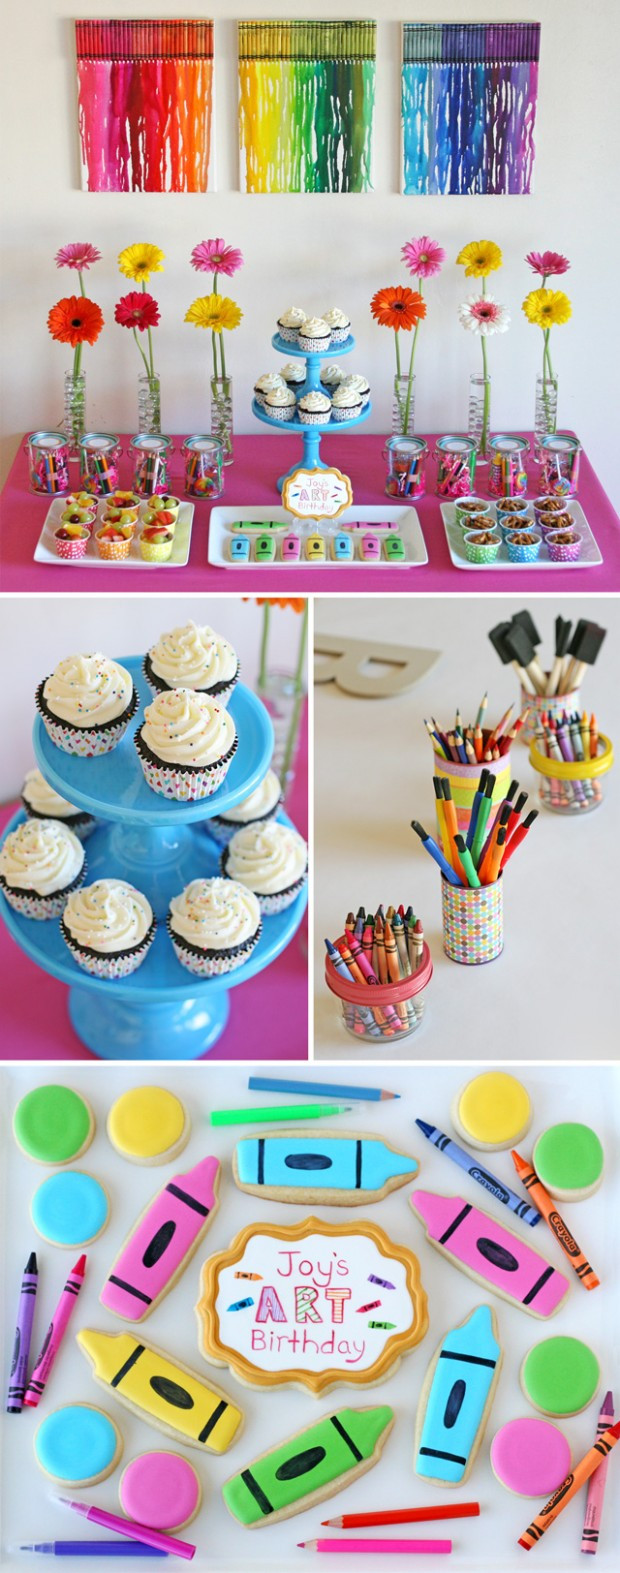 Cute Birthday Decorations
 22 Cute and Fun Kids Birthday Party Decoration Ideas